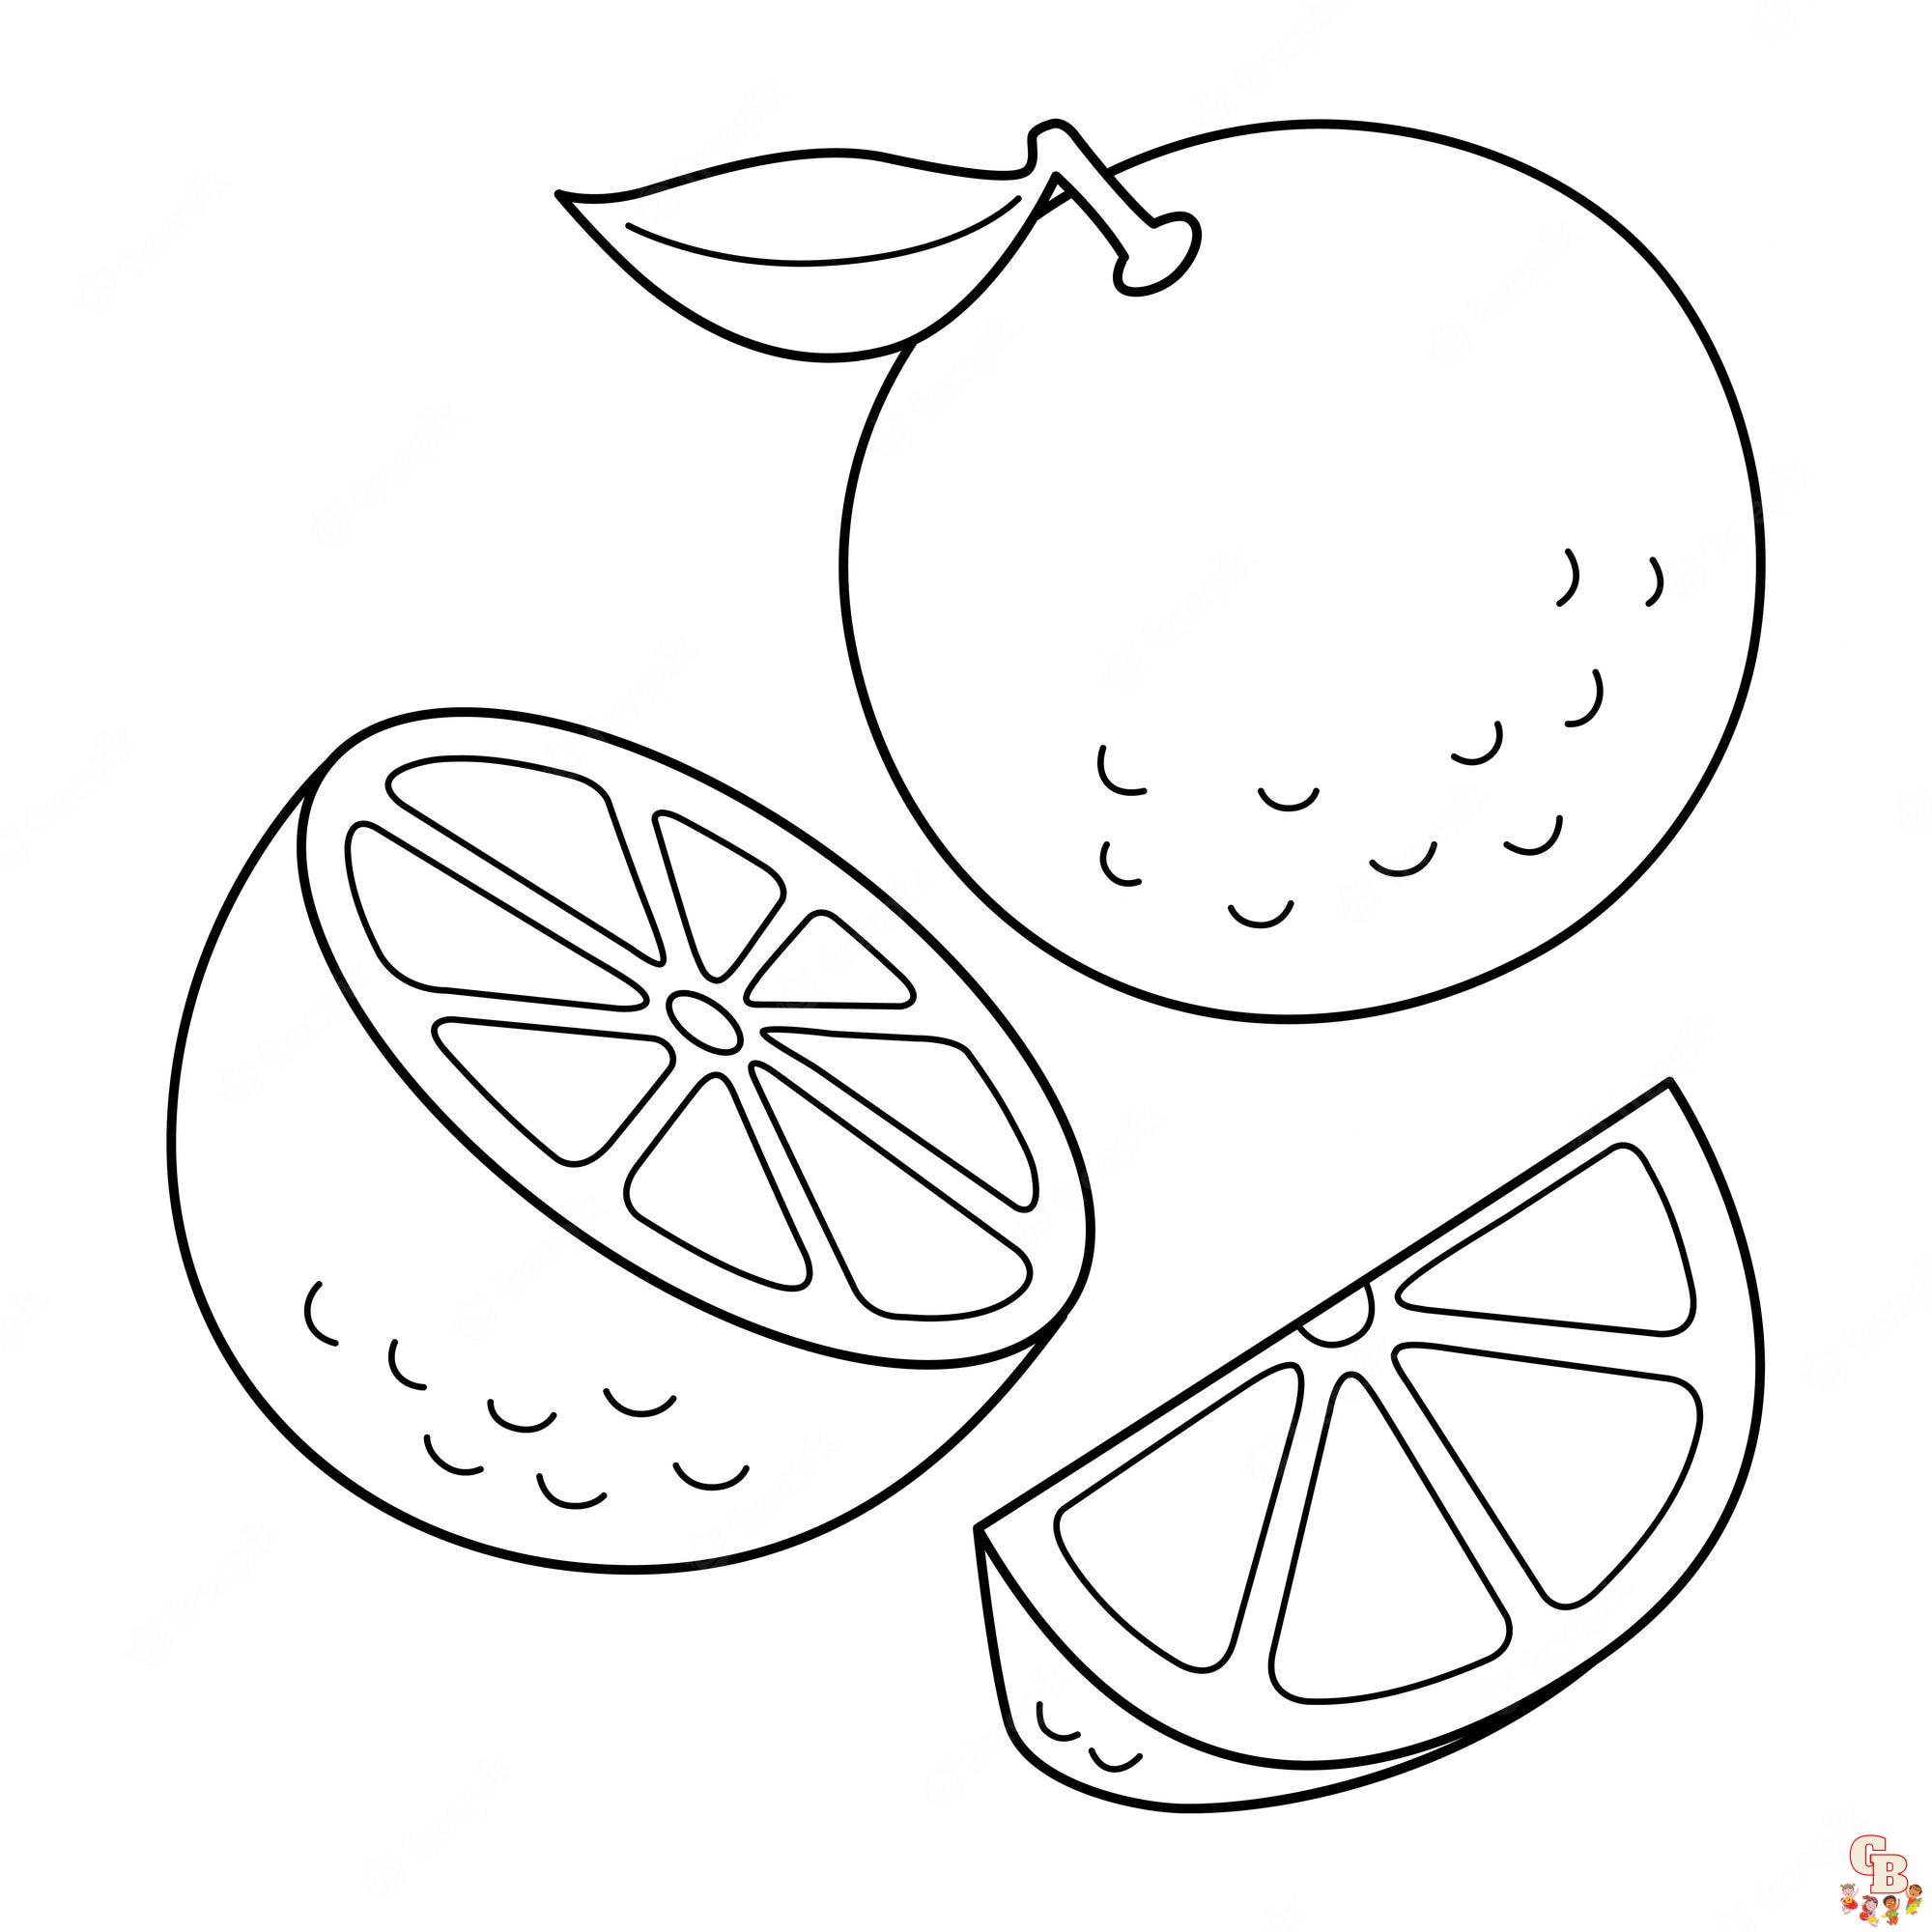 Fun and free orange coloring pages for kids